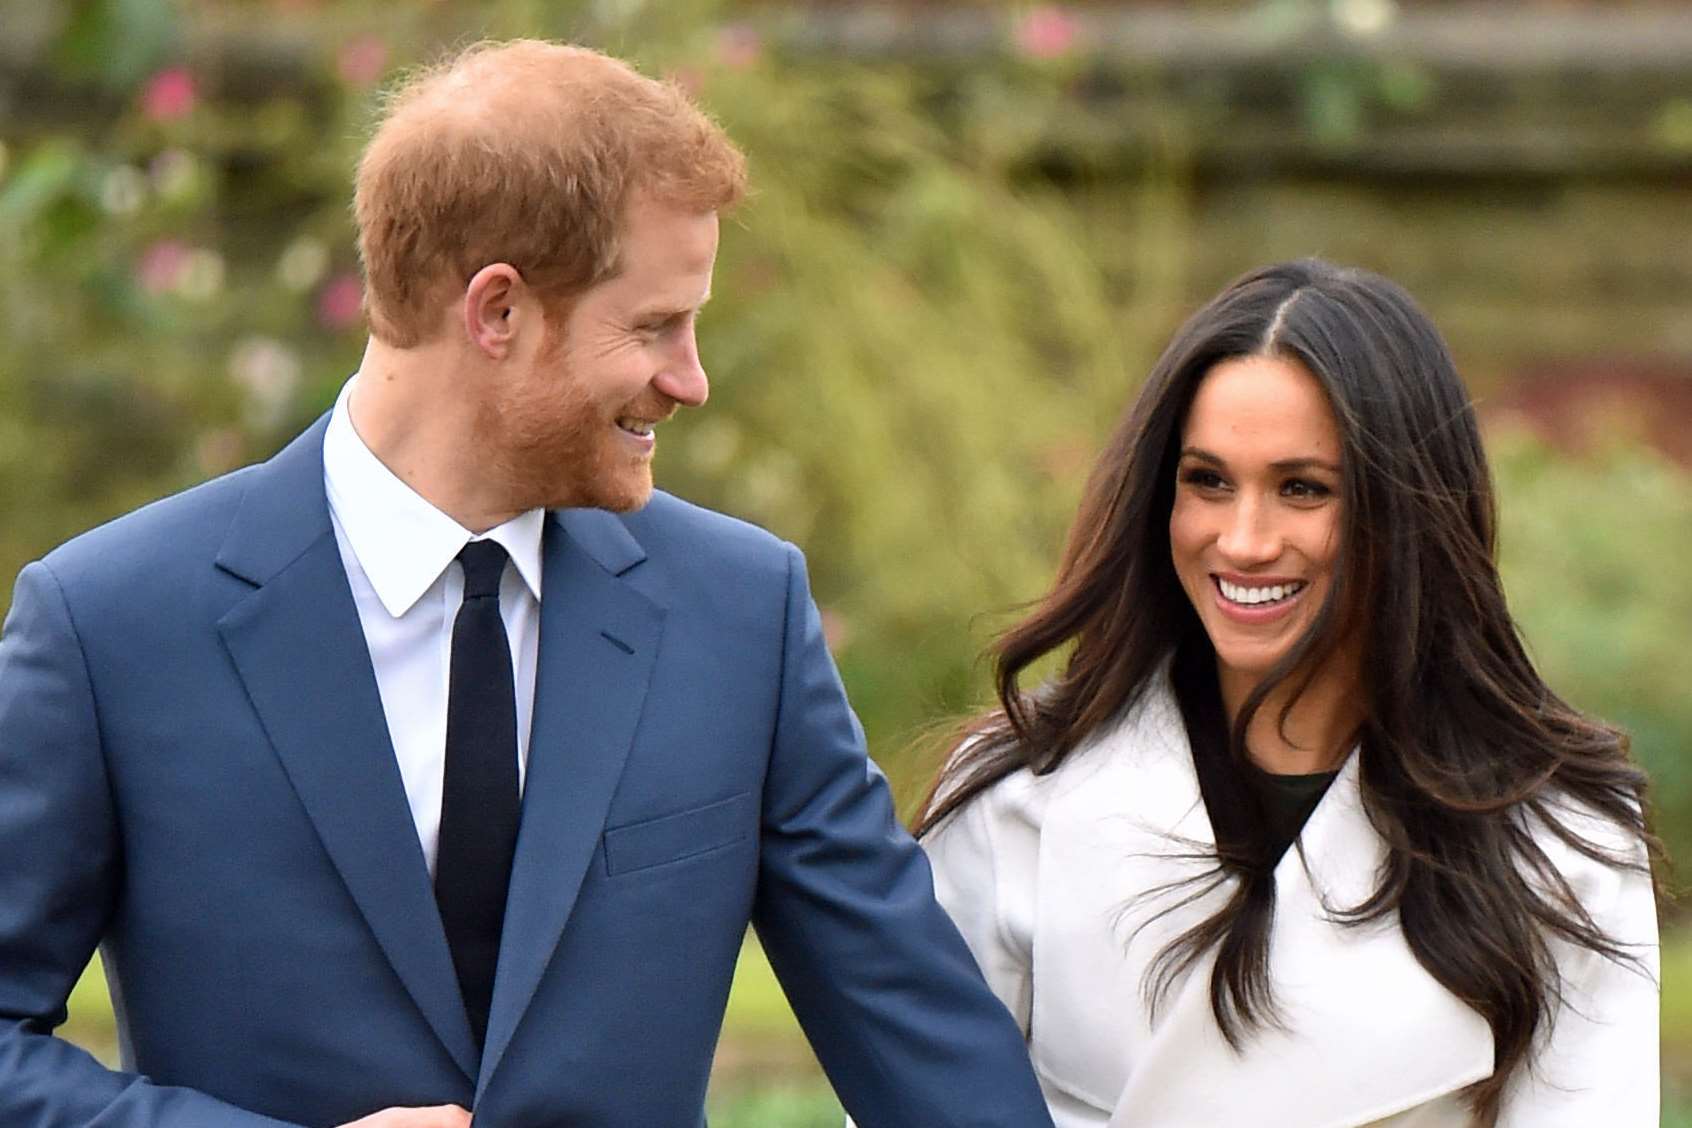 Prince Harry and Meghan Markle will tie the knot in May